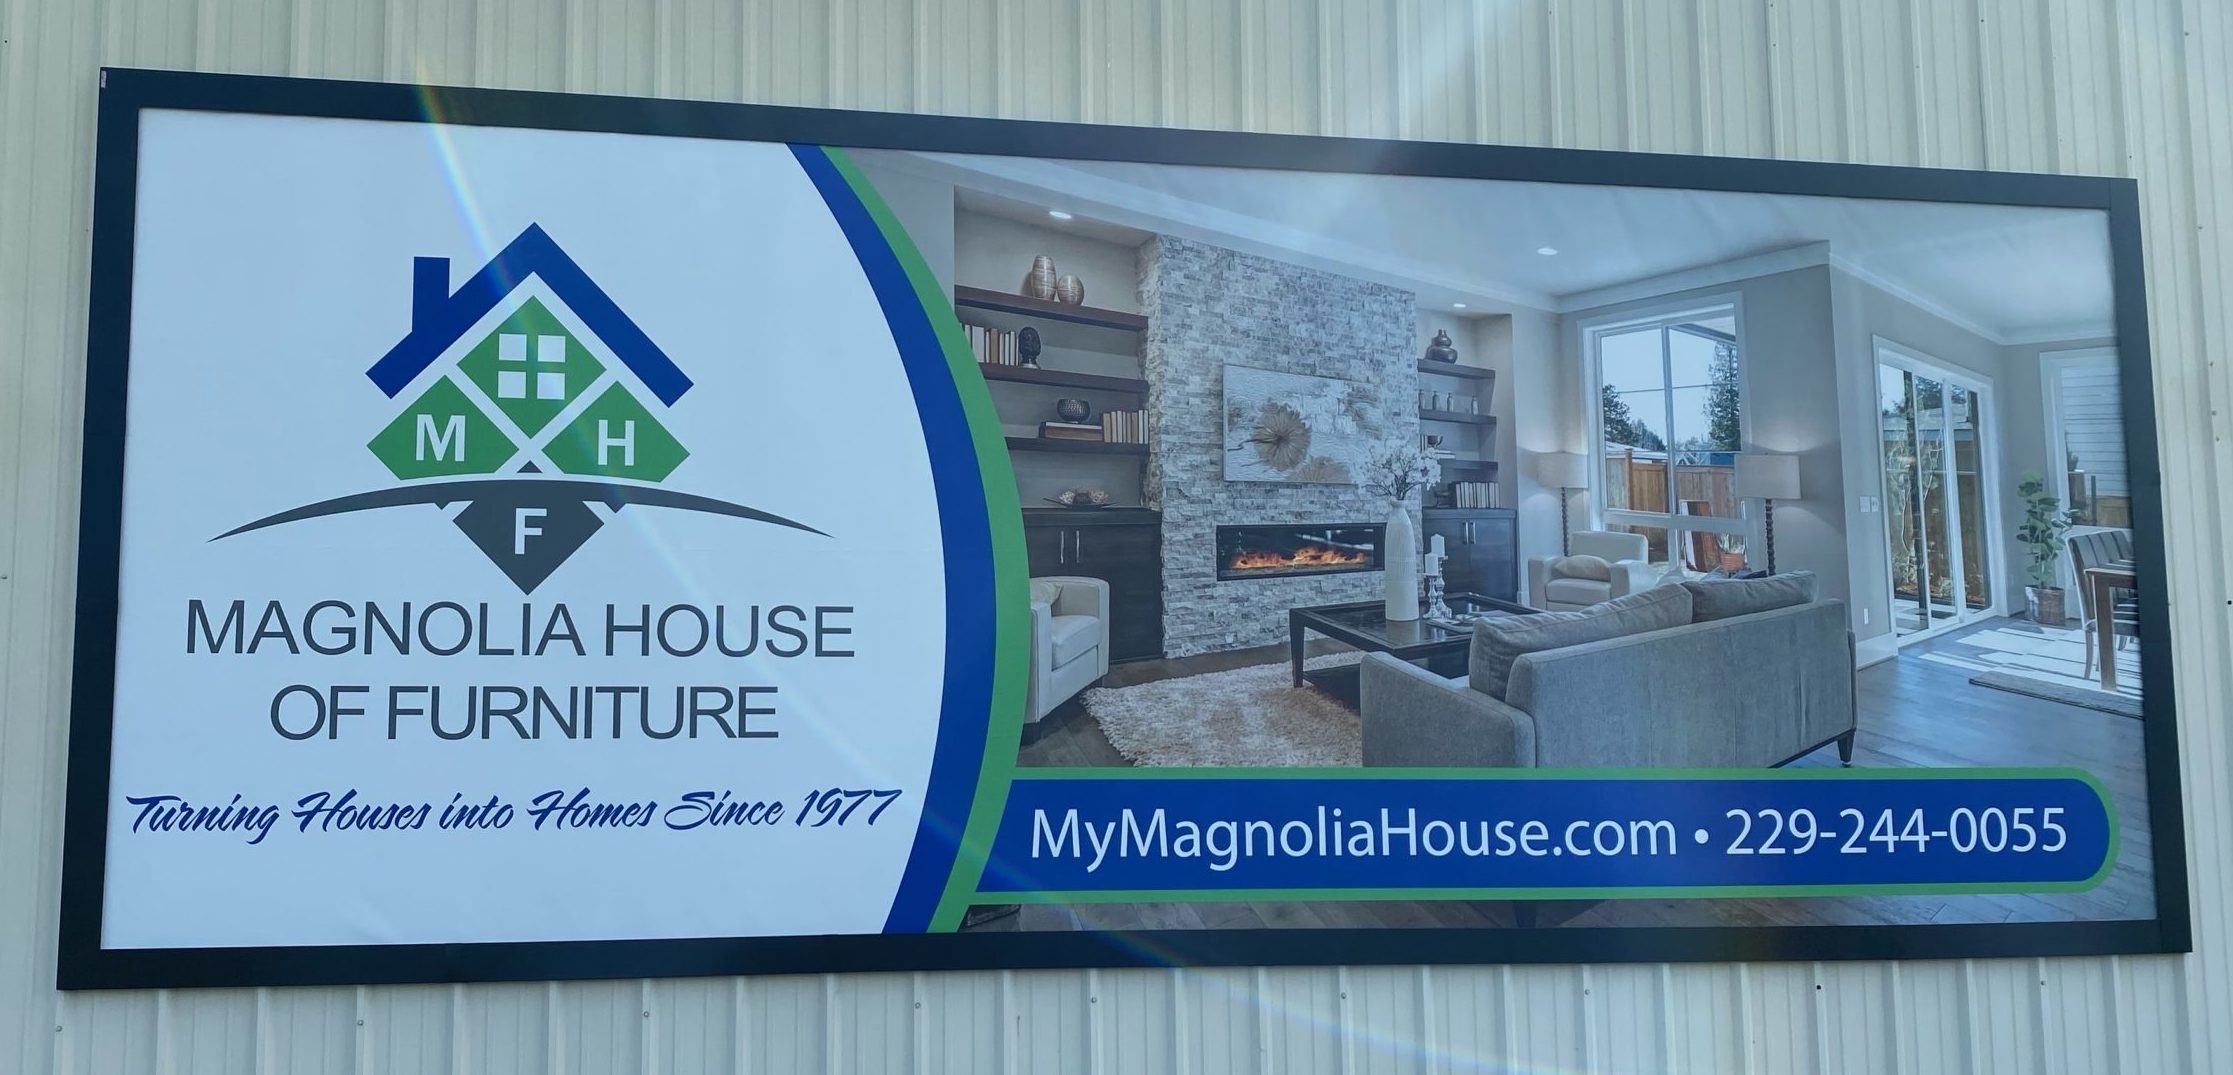 SOGA Graphics installs a SignSpring BannerFrame Classic with covers for Magnolia House of Furniture in Georgia